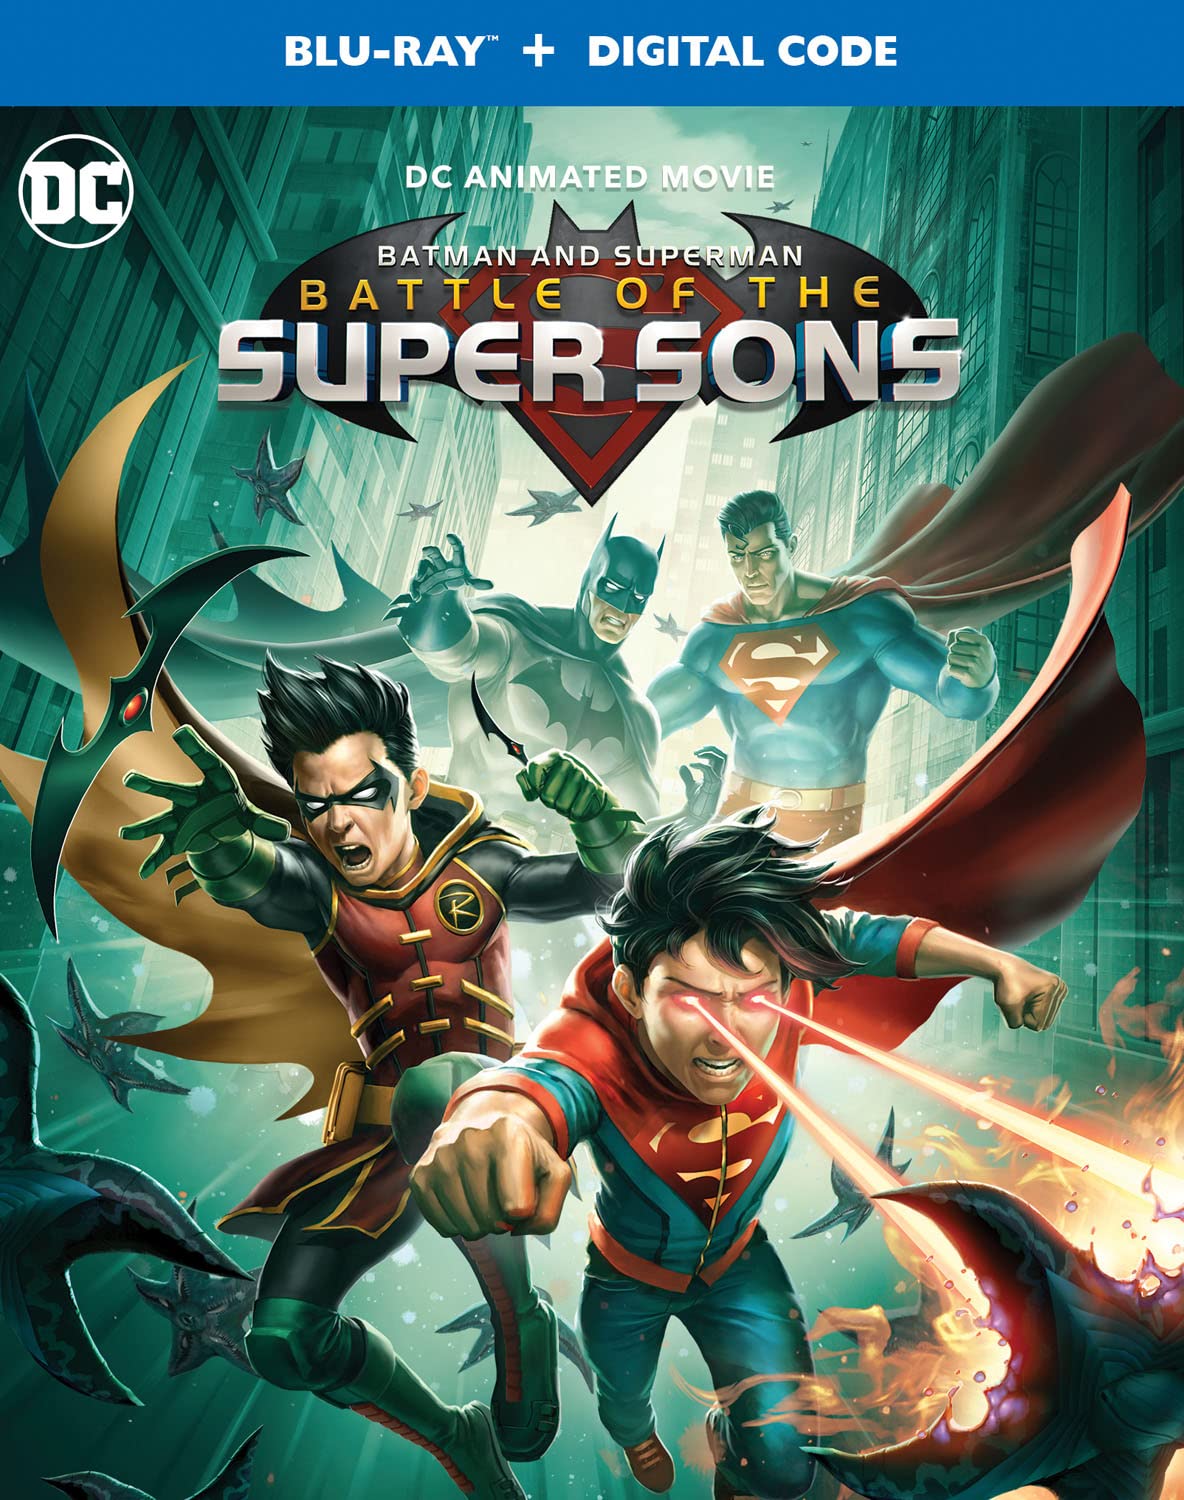 Batman and Superman- Battle of the Super Sons Blu-ray